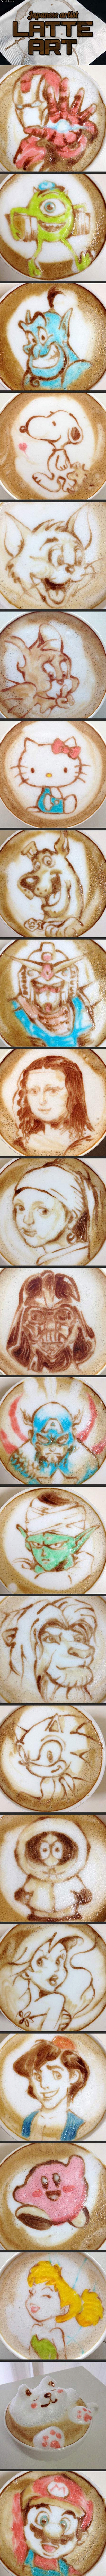 japanese_latte_art_takes_it_to_a_whole_new_level.jpg